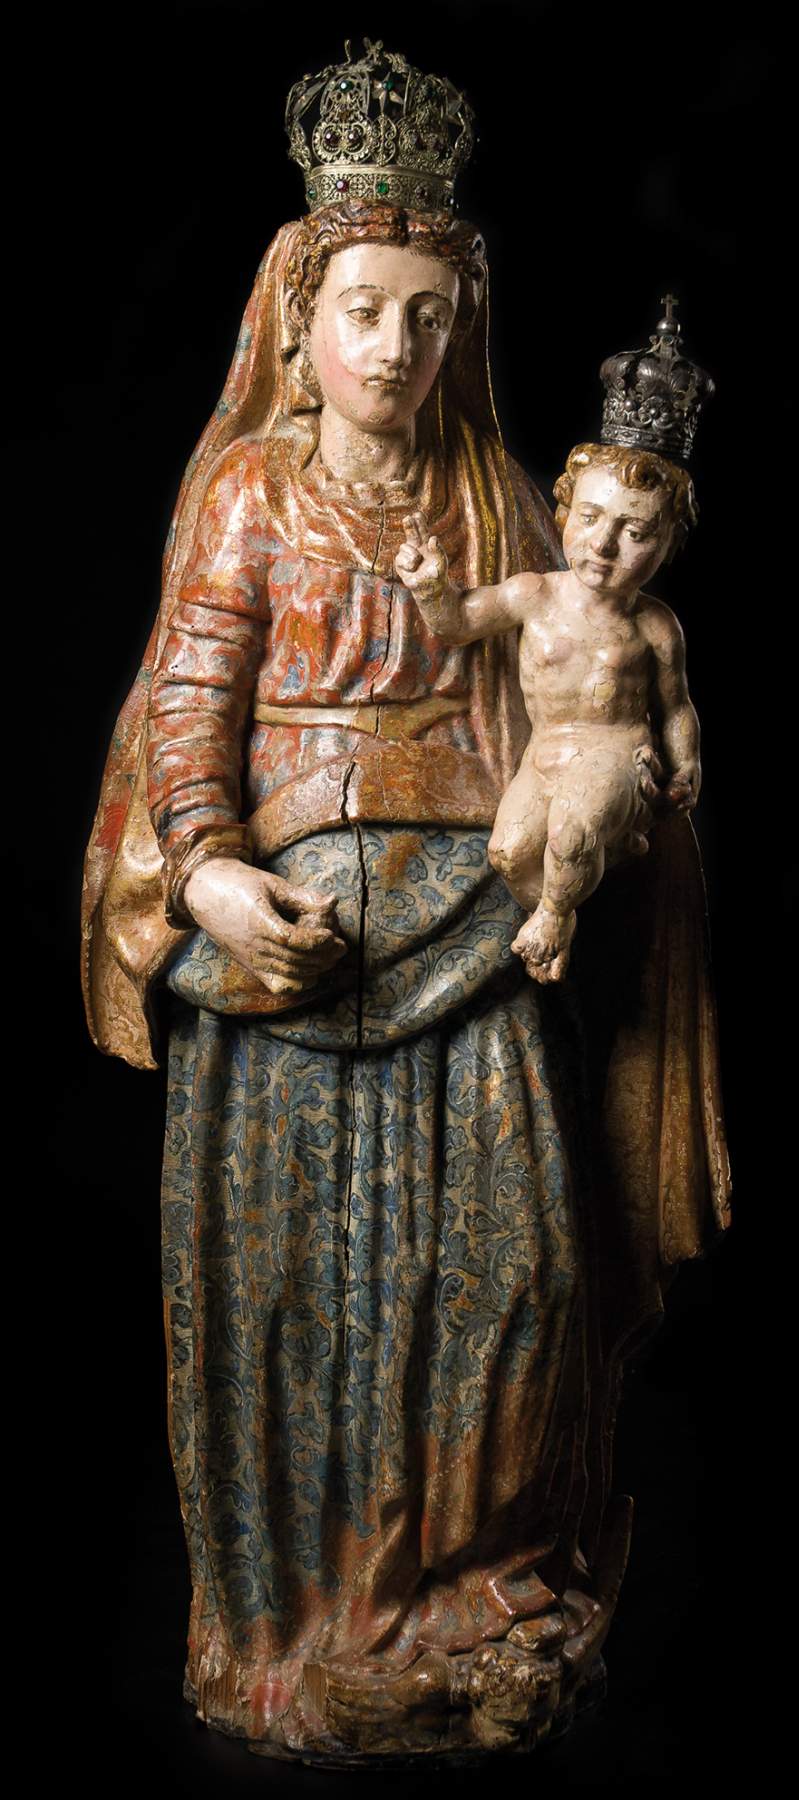 "Virgin with Child".  Carved polychrome and gilt wooden sculpture.  Castilian school.  16th century.